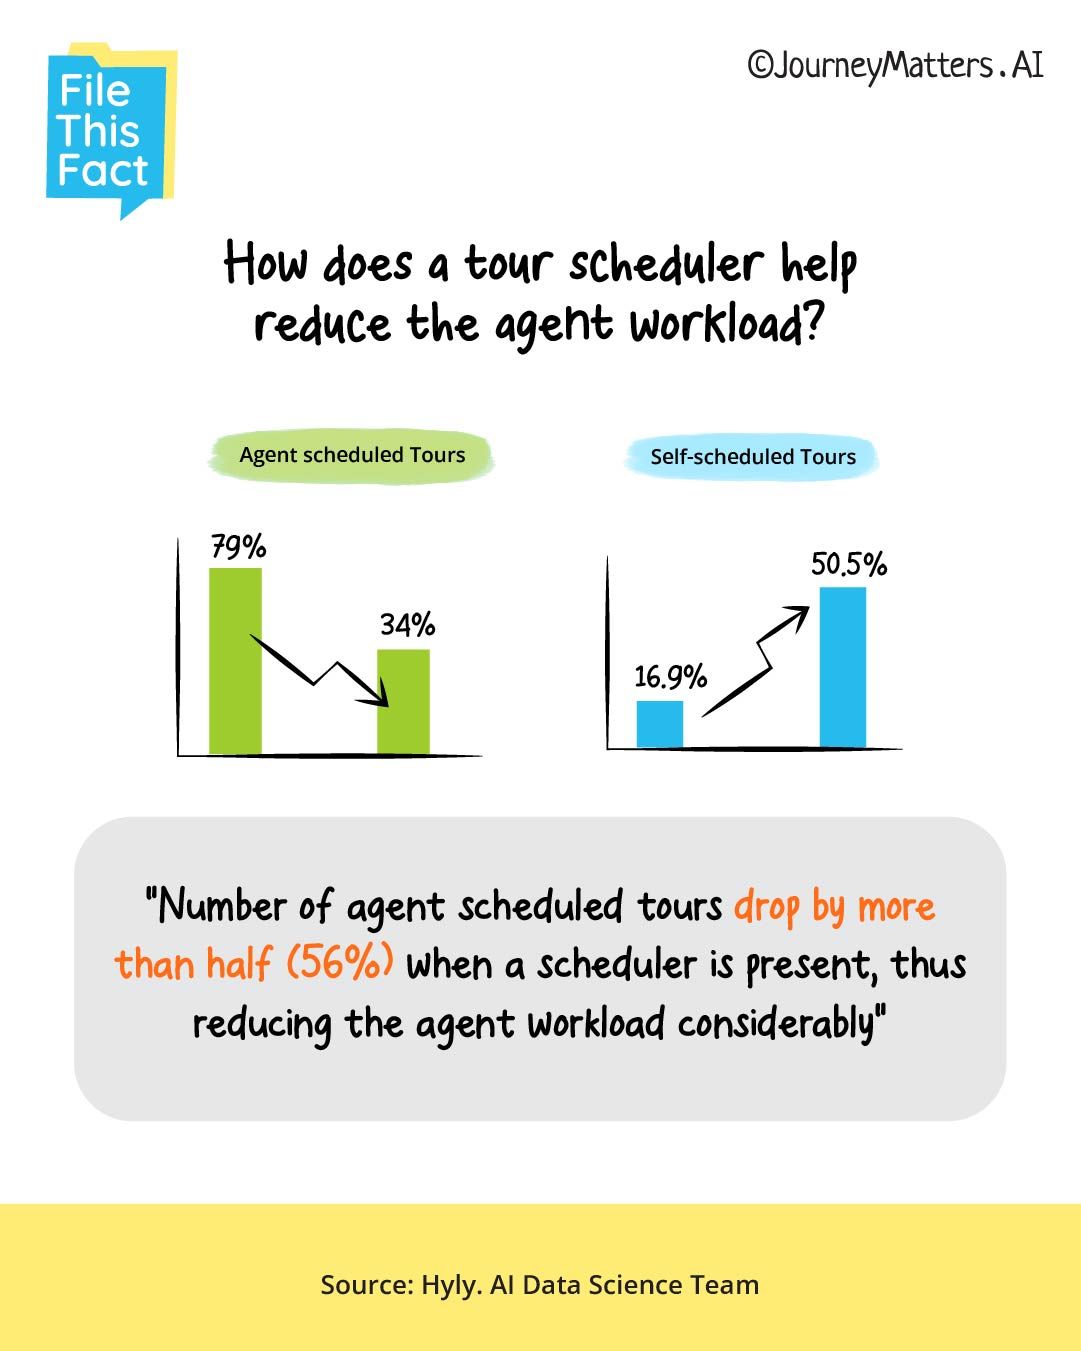 Findings of impact of tour scheduler on agent workload